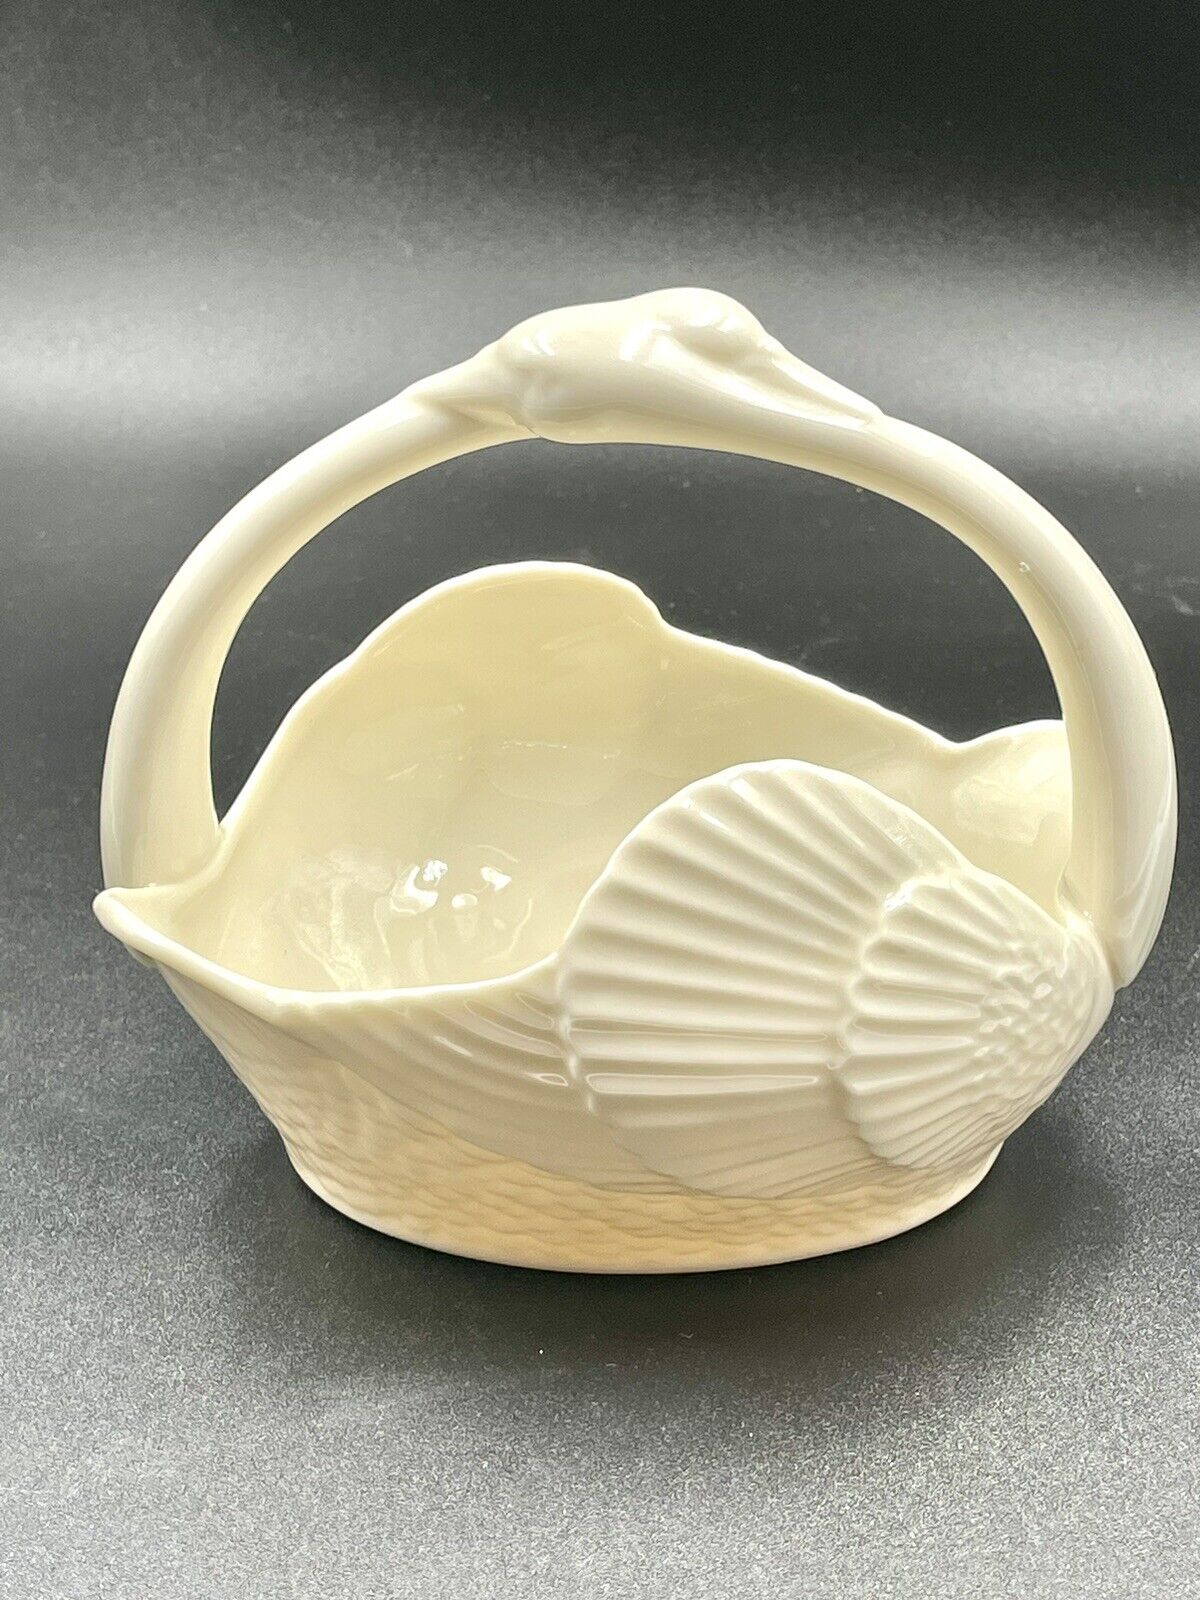 Lenox Legacy Bowl Bride’s Two Swan Basket Trinket Candy Dish Handled Made In USA